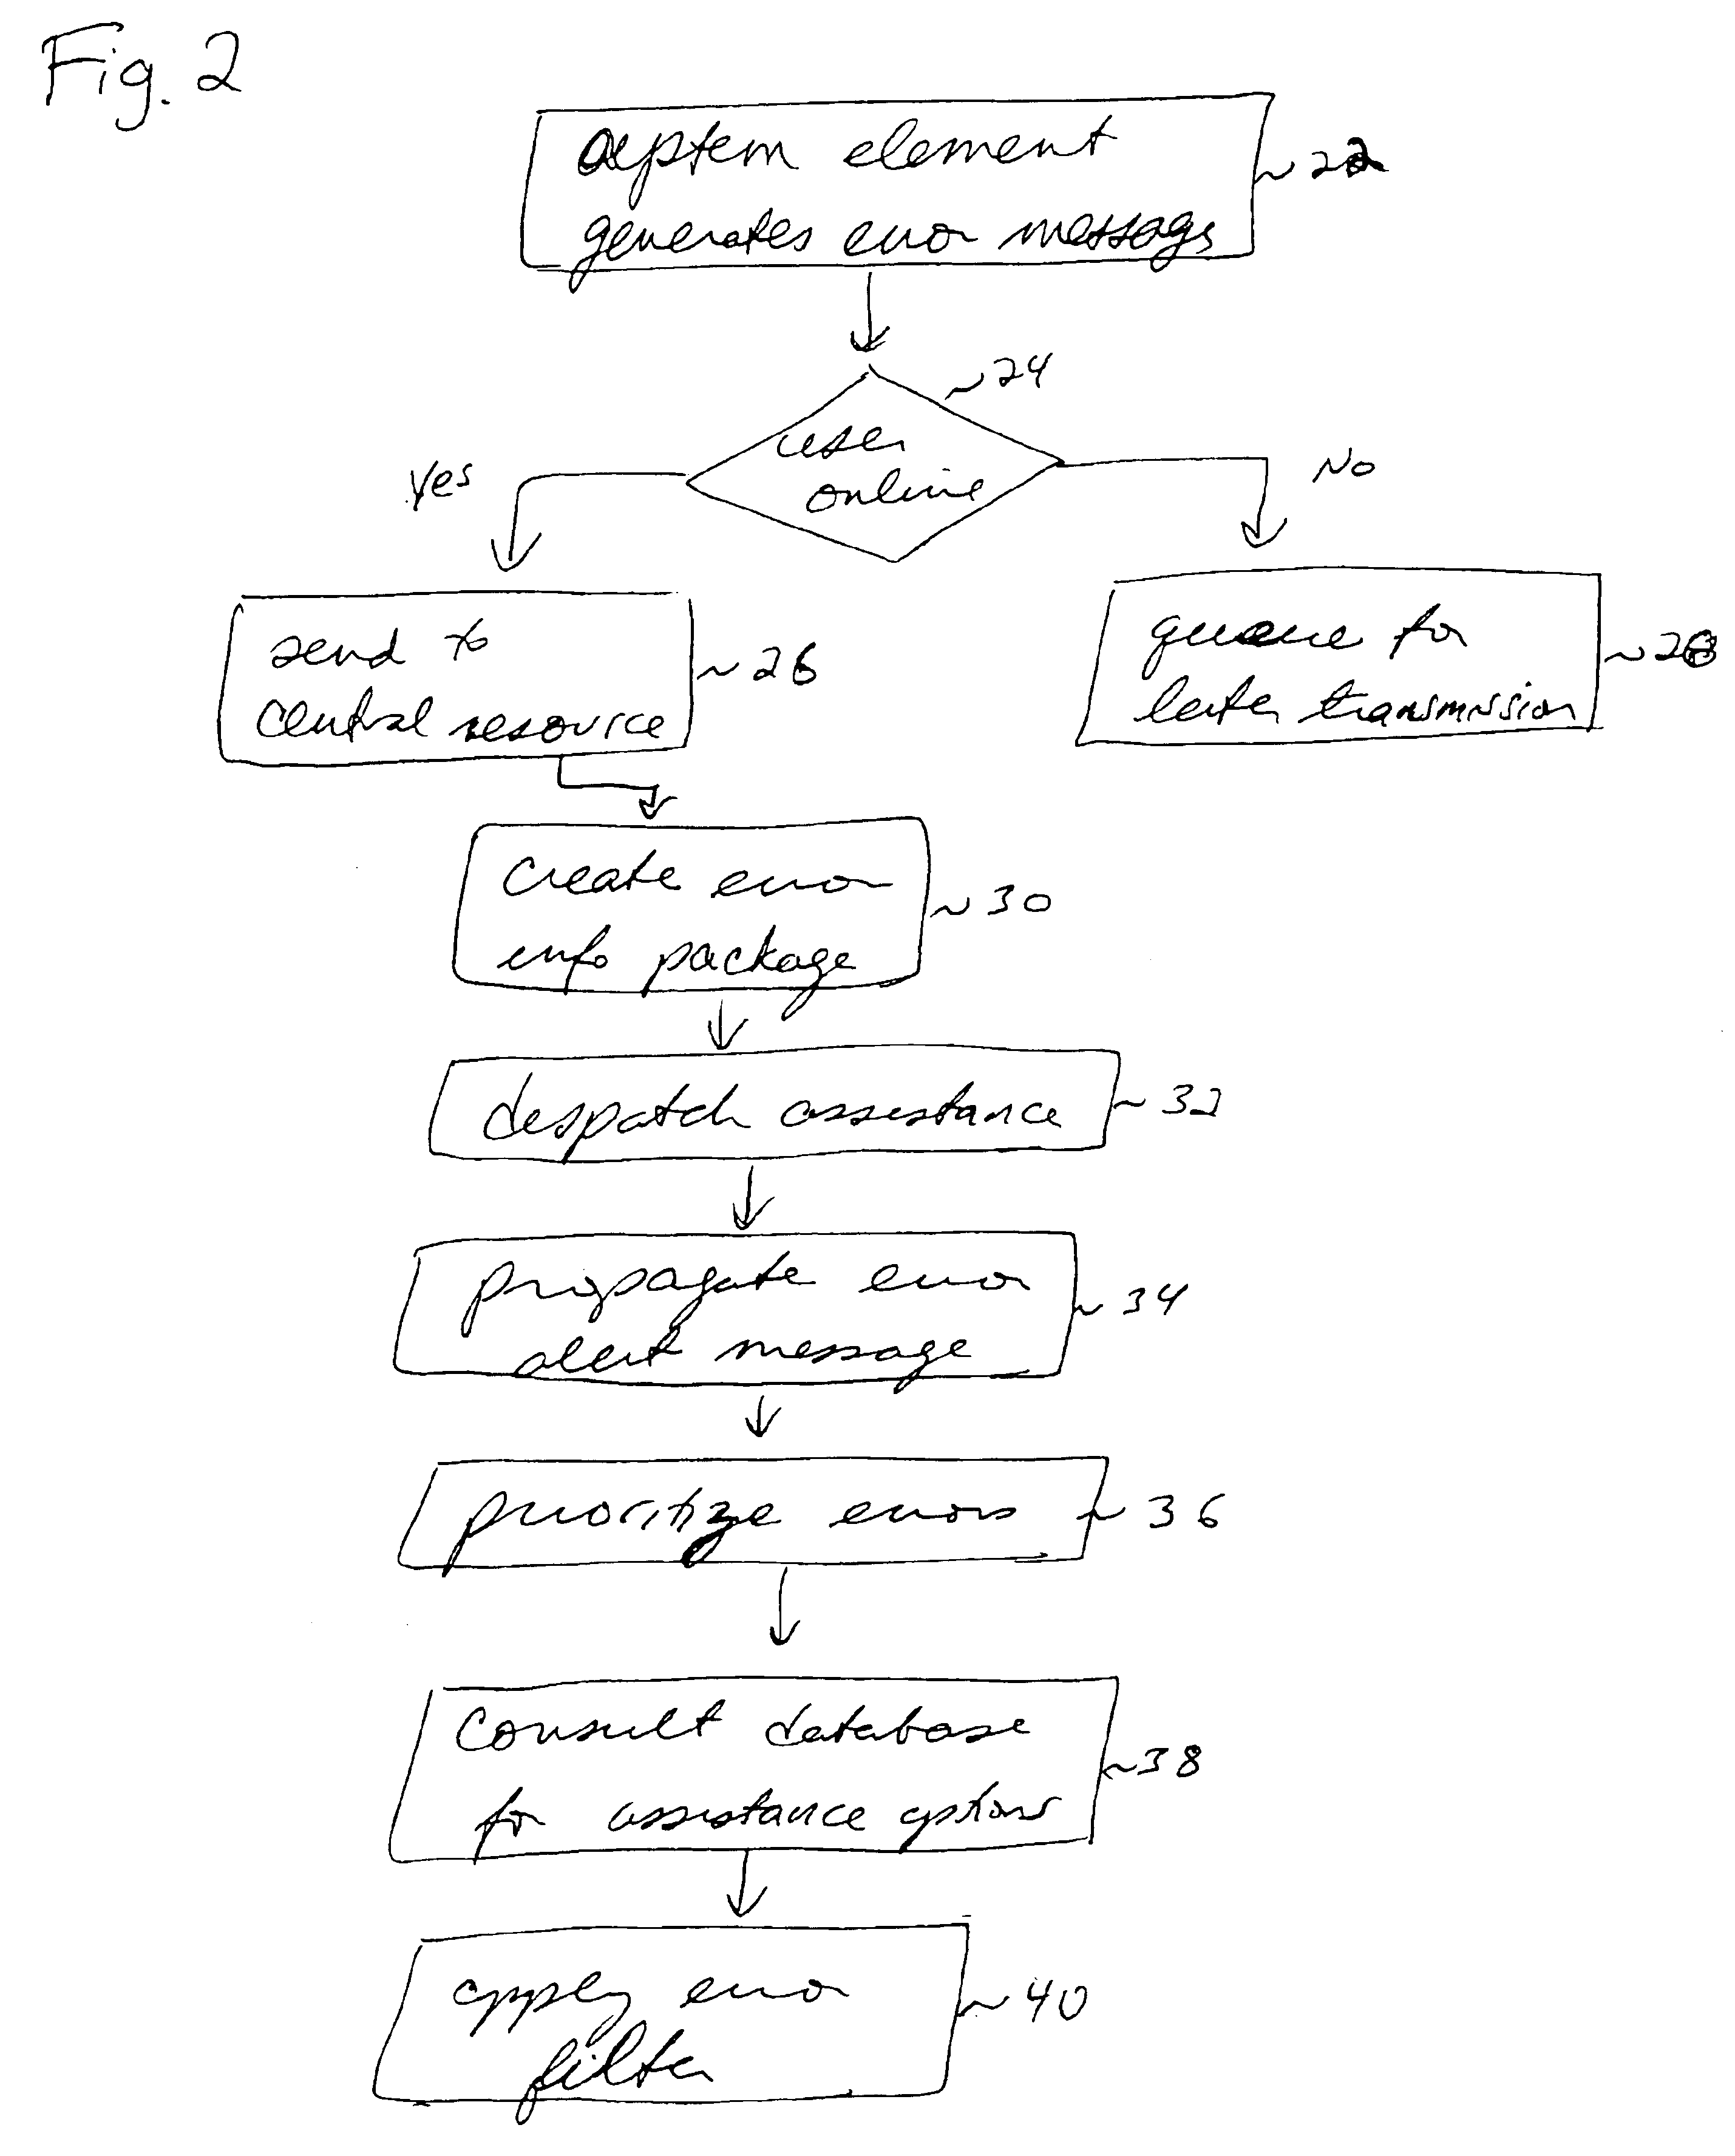 Method and system for handling errors in a distributed computer system